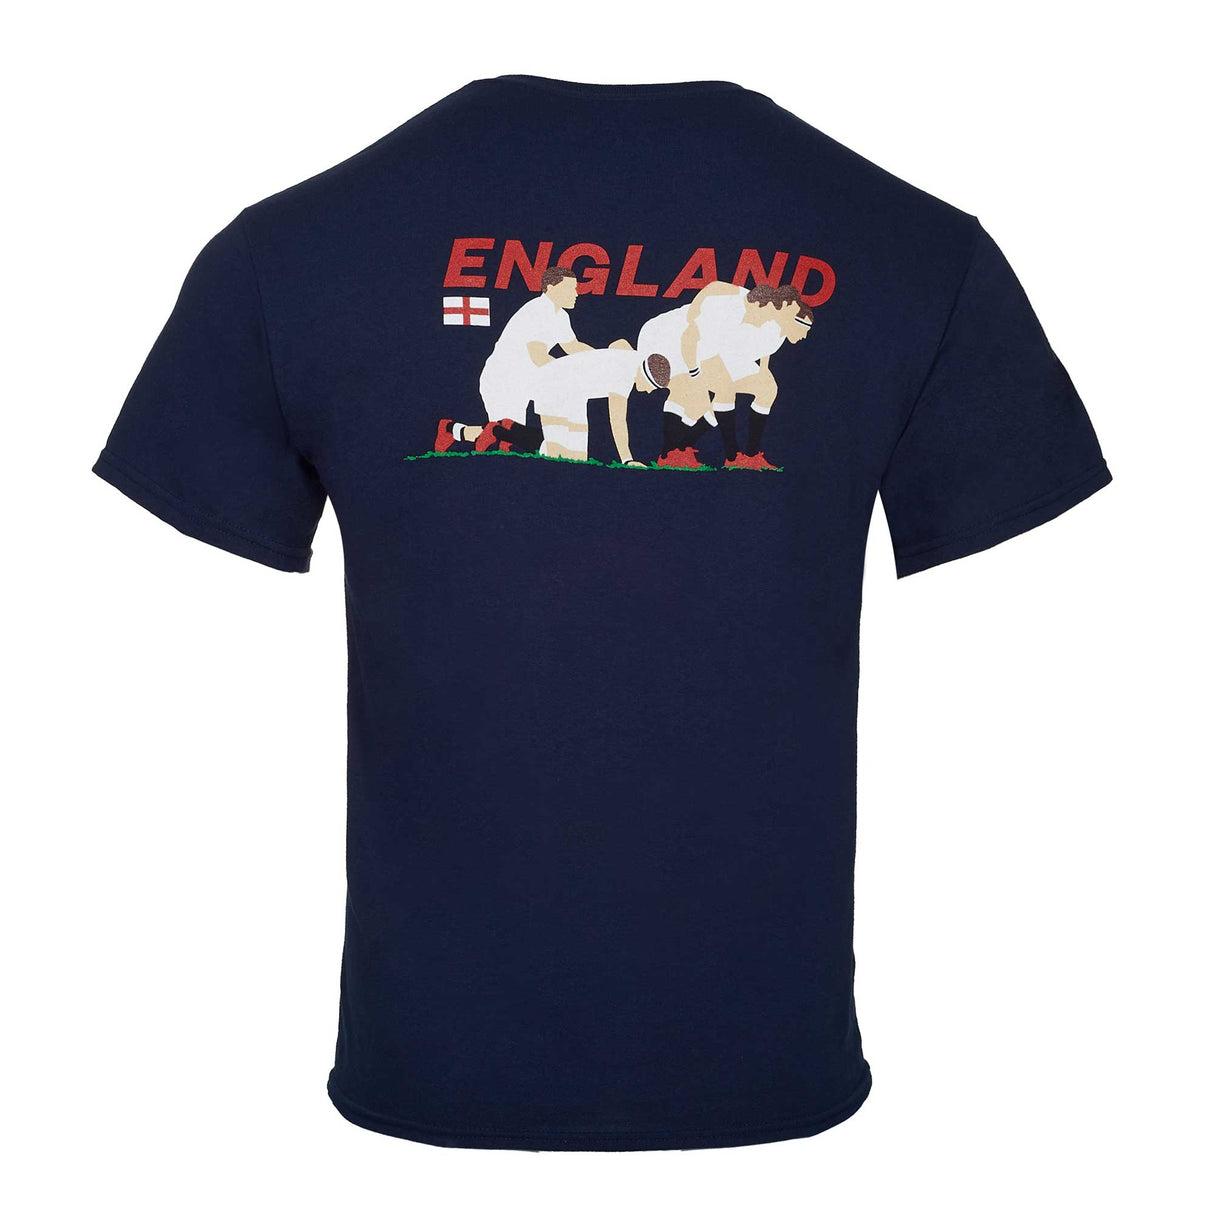 English Nations Graphic T-Shirt |Gainline Tee | Gainline | Absolute Rugby